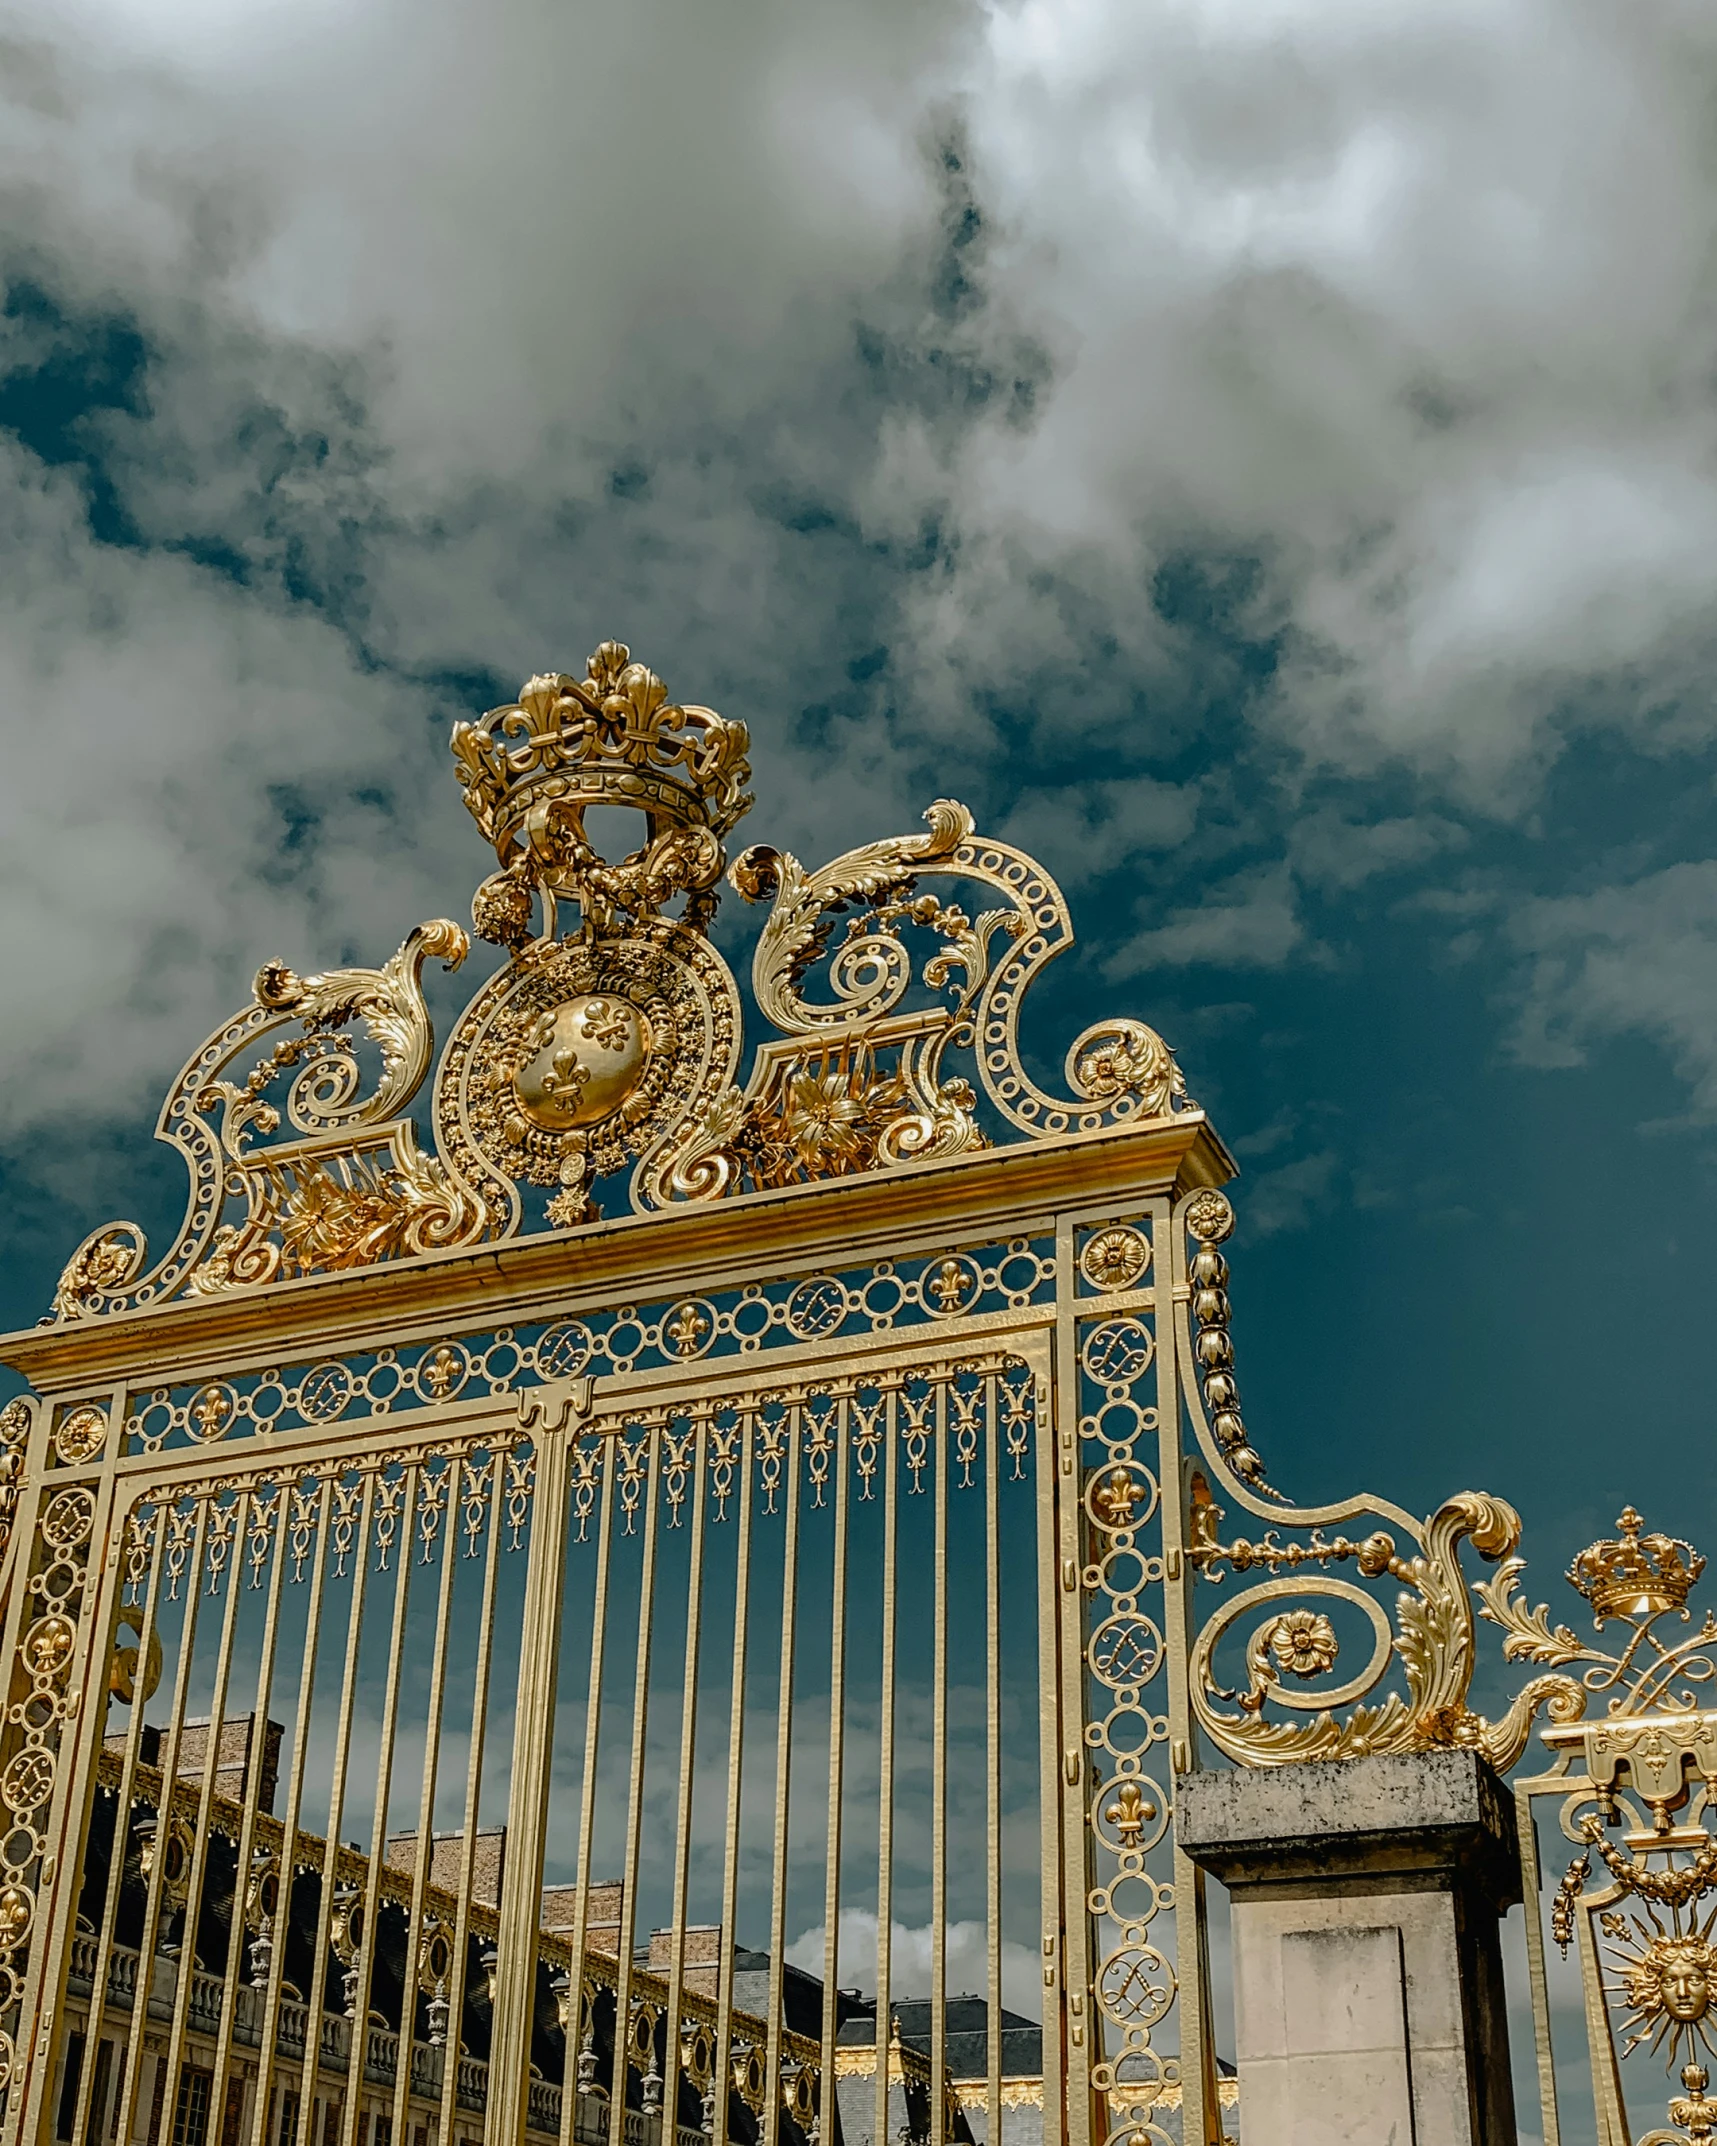 the golden gates of an old castle with clouds in the background